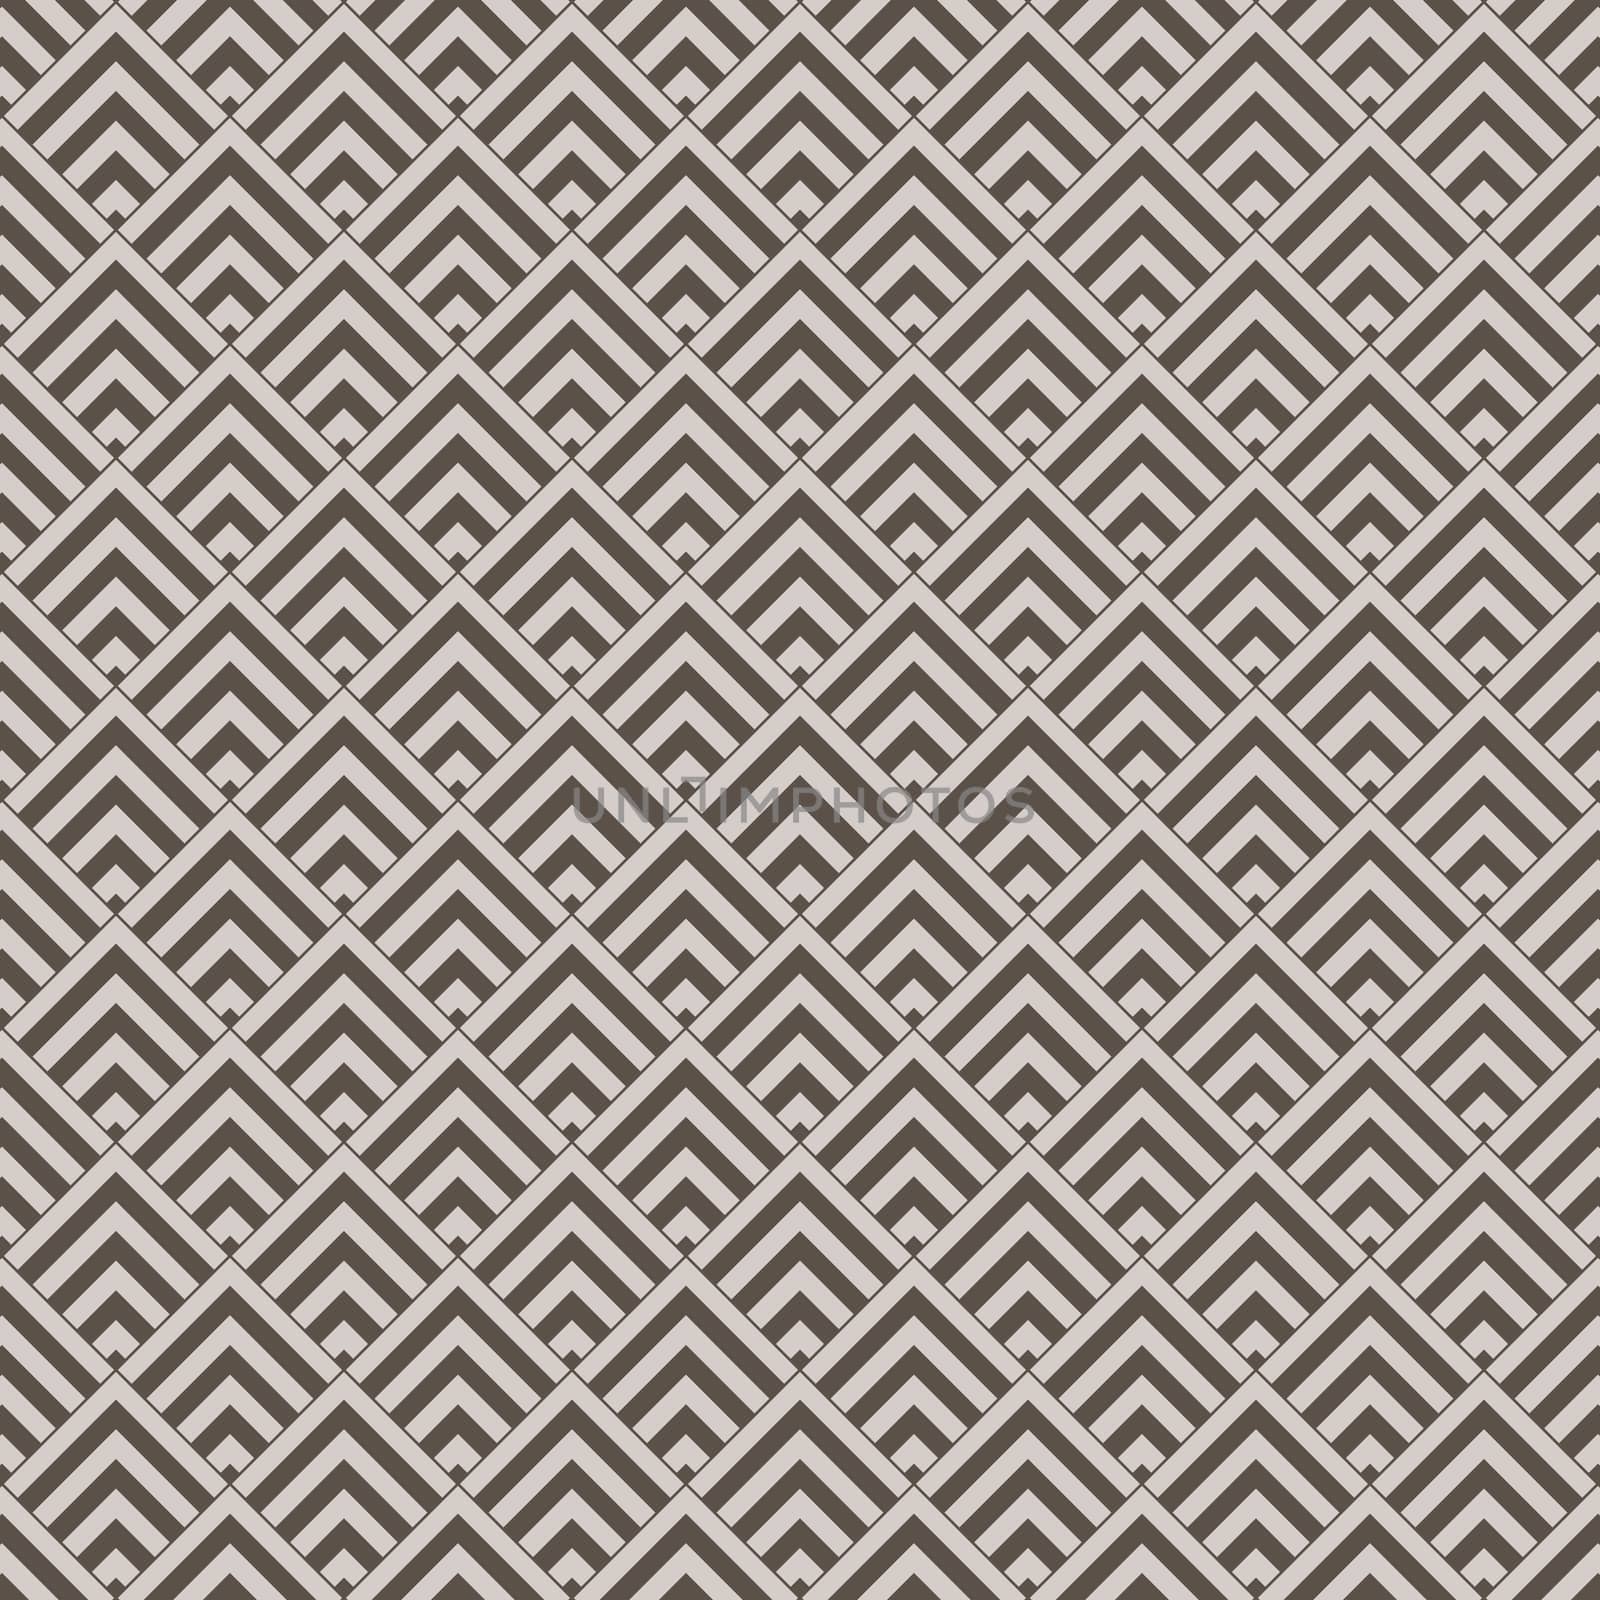 Brown geometric pattern background by PhiphatStockphoto